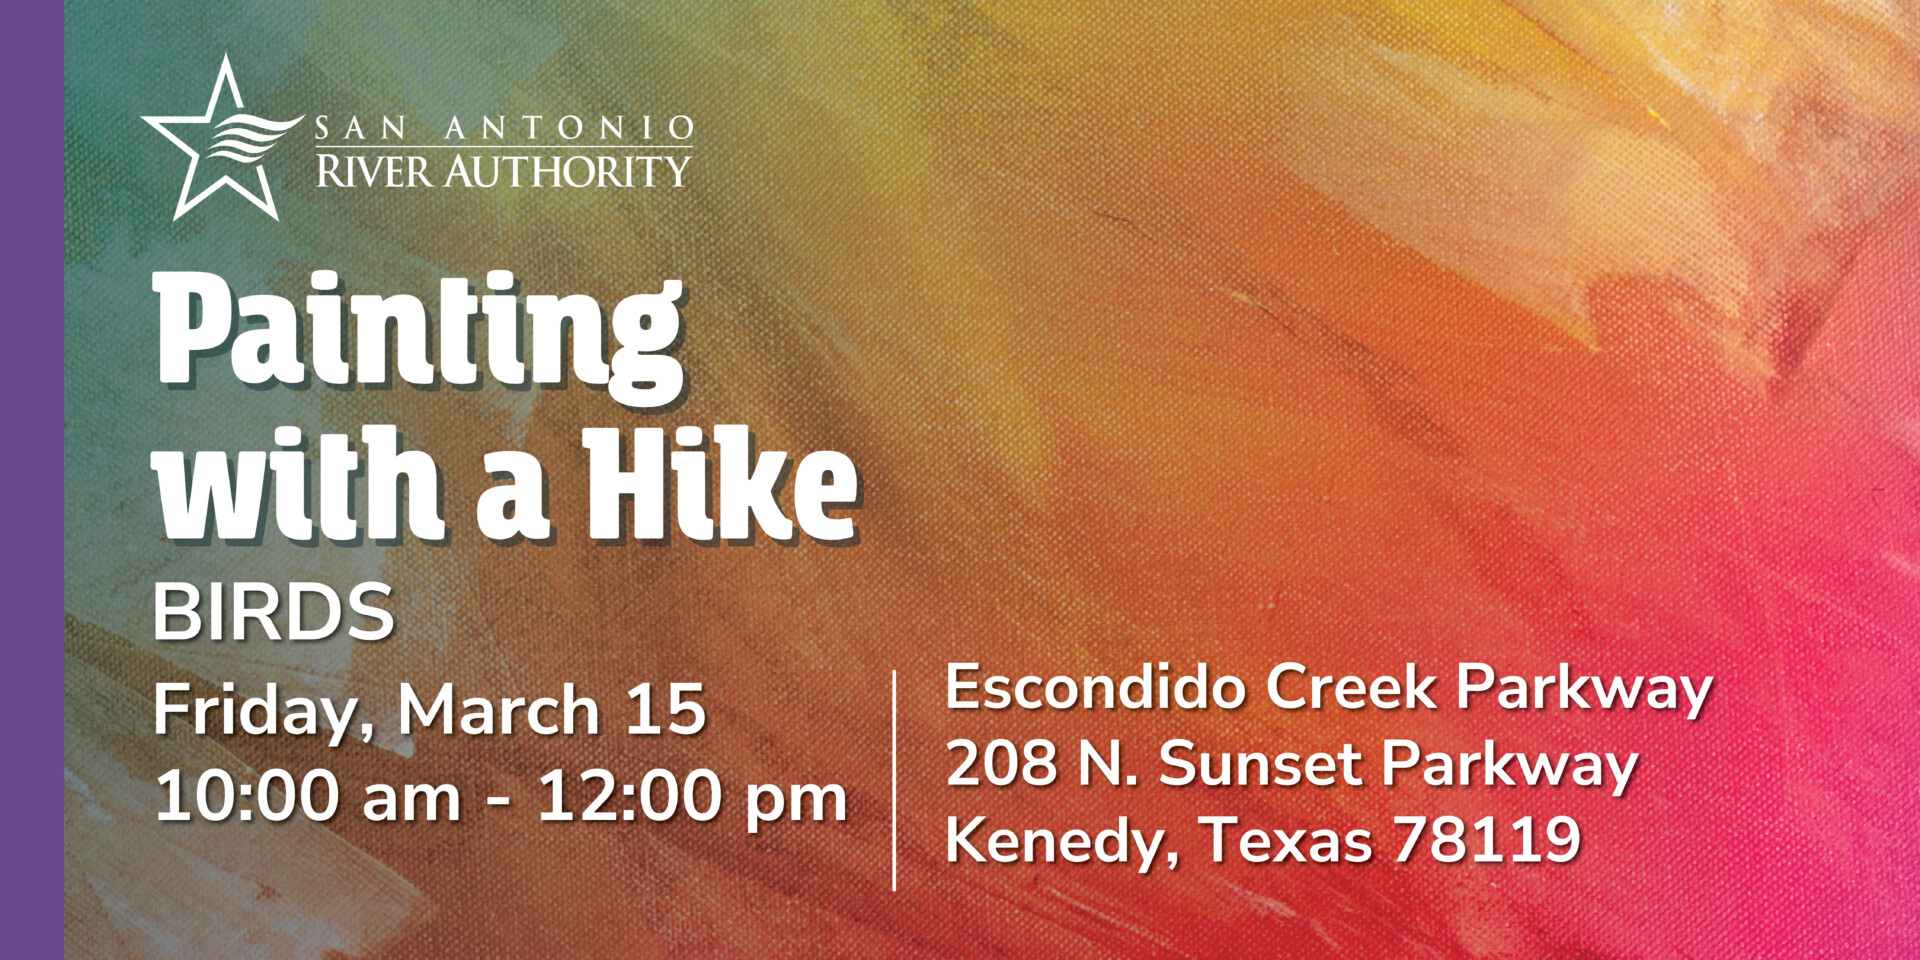 Painting with a Hike at Escondido Creek Parkway